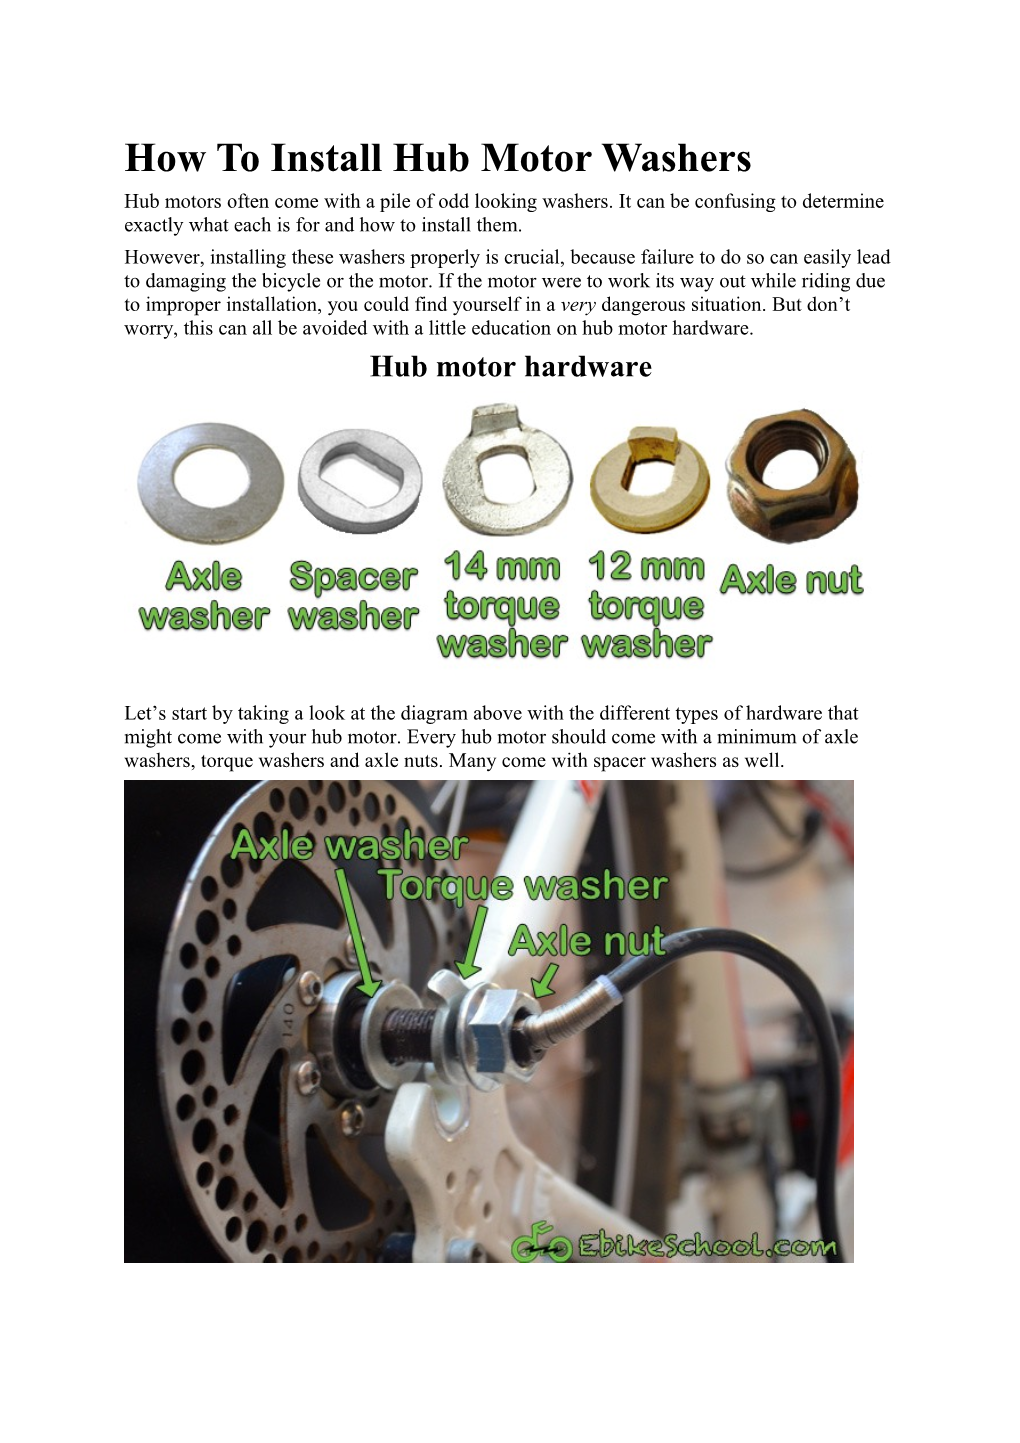 How to Install Hub Motor Washers